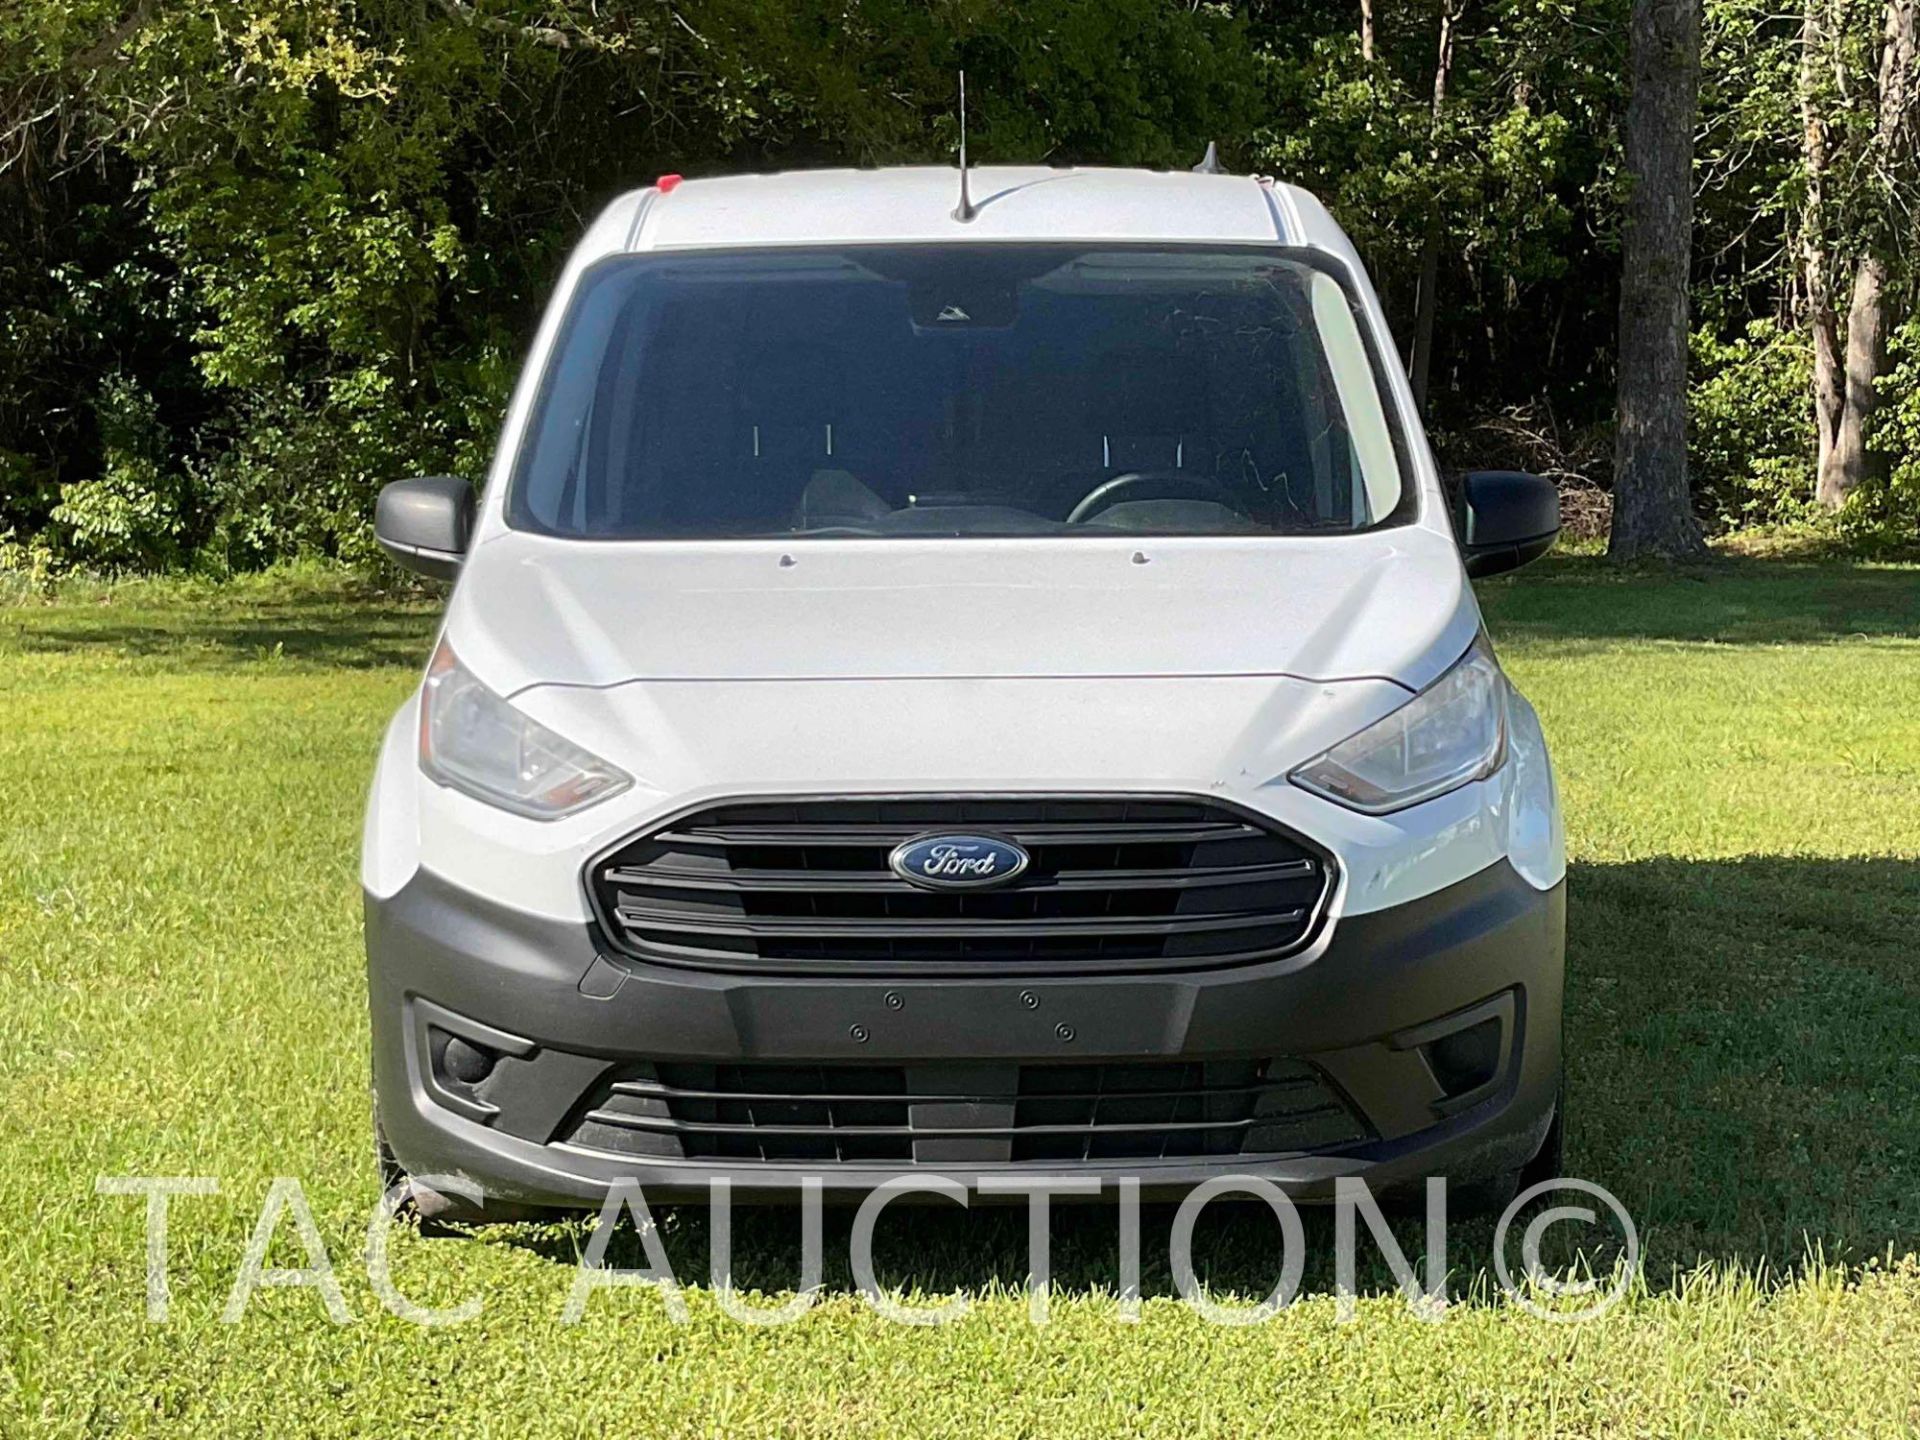 2019 Ford Transit Connect - Image 8 of 47